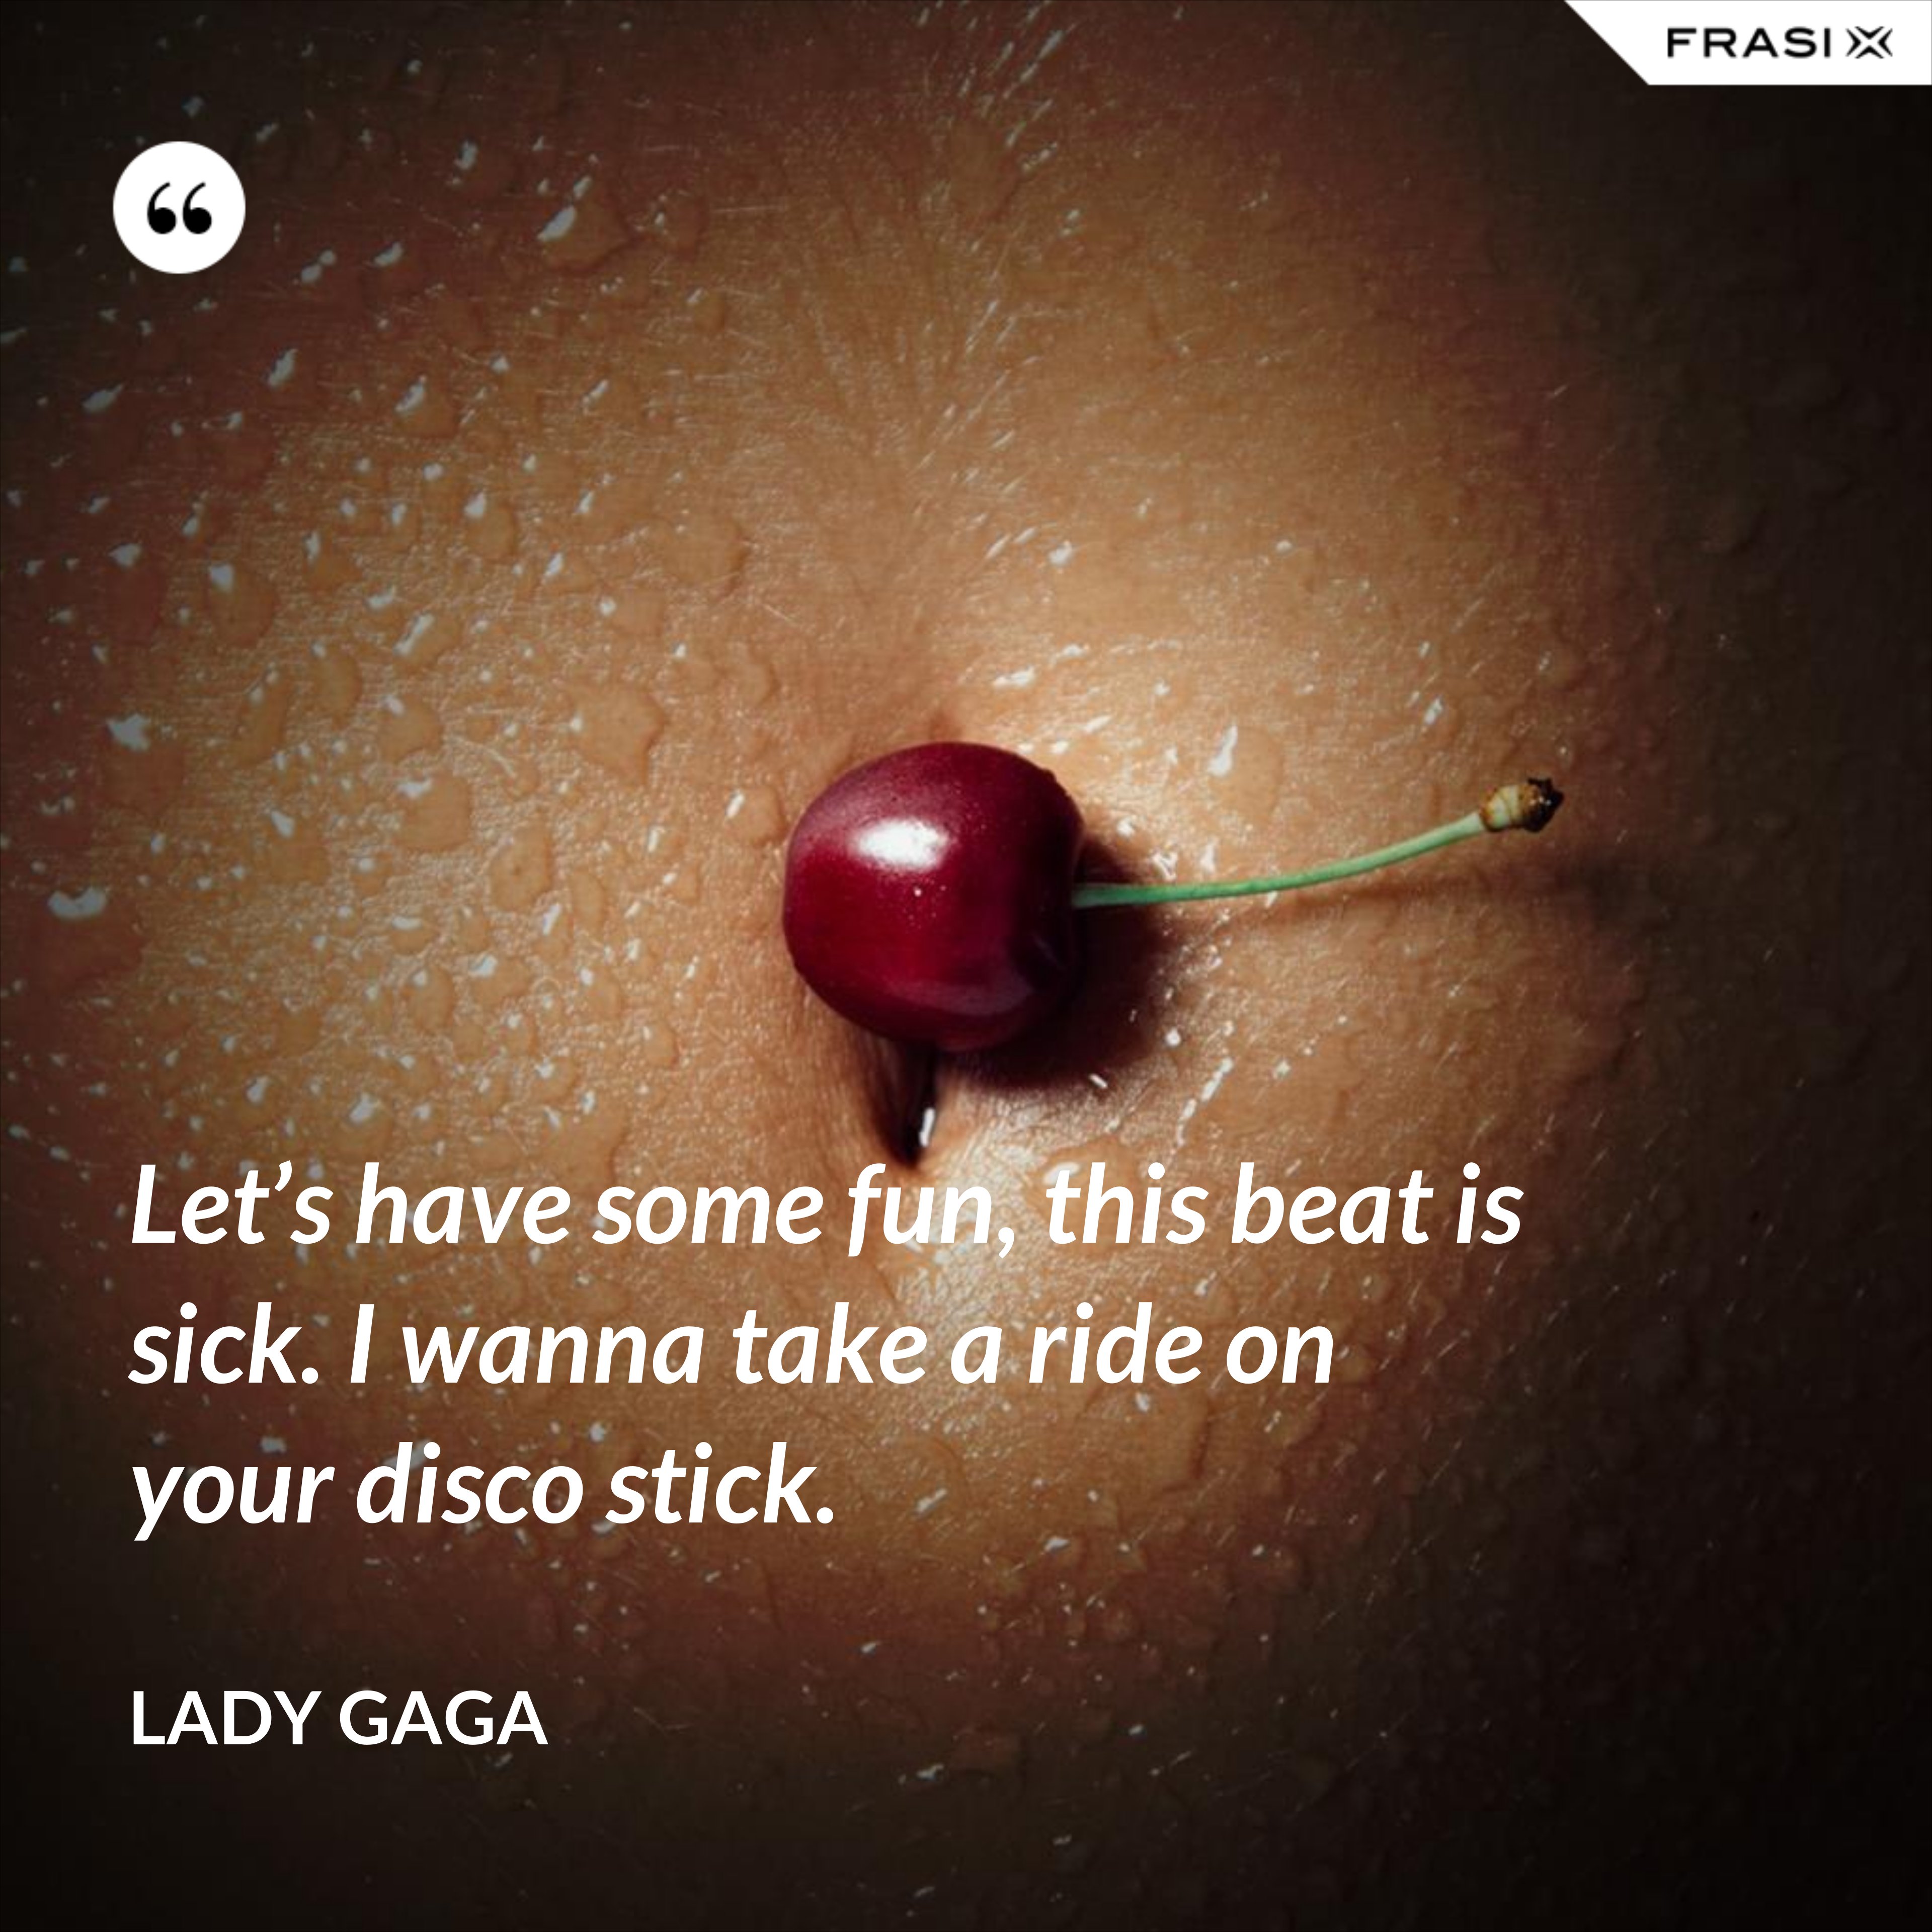 Let’s have some fun, this beat is sick. I wanna take a ride on your disco stick. - Lady Gaga